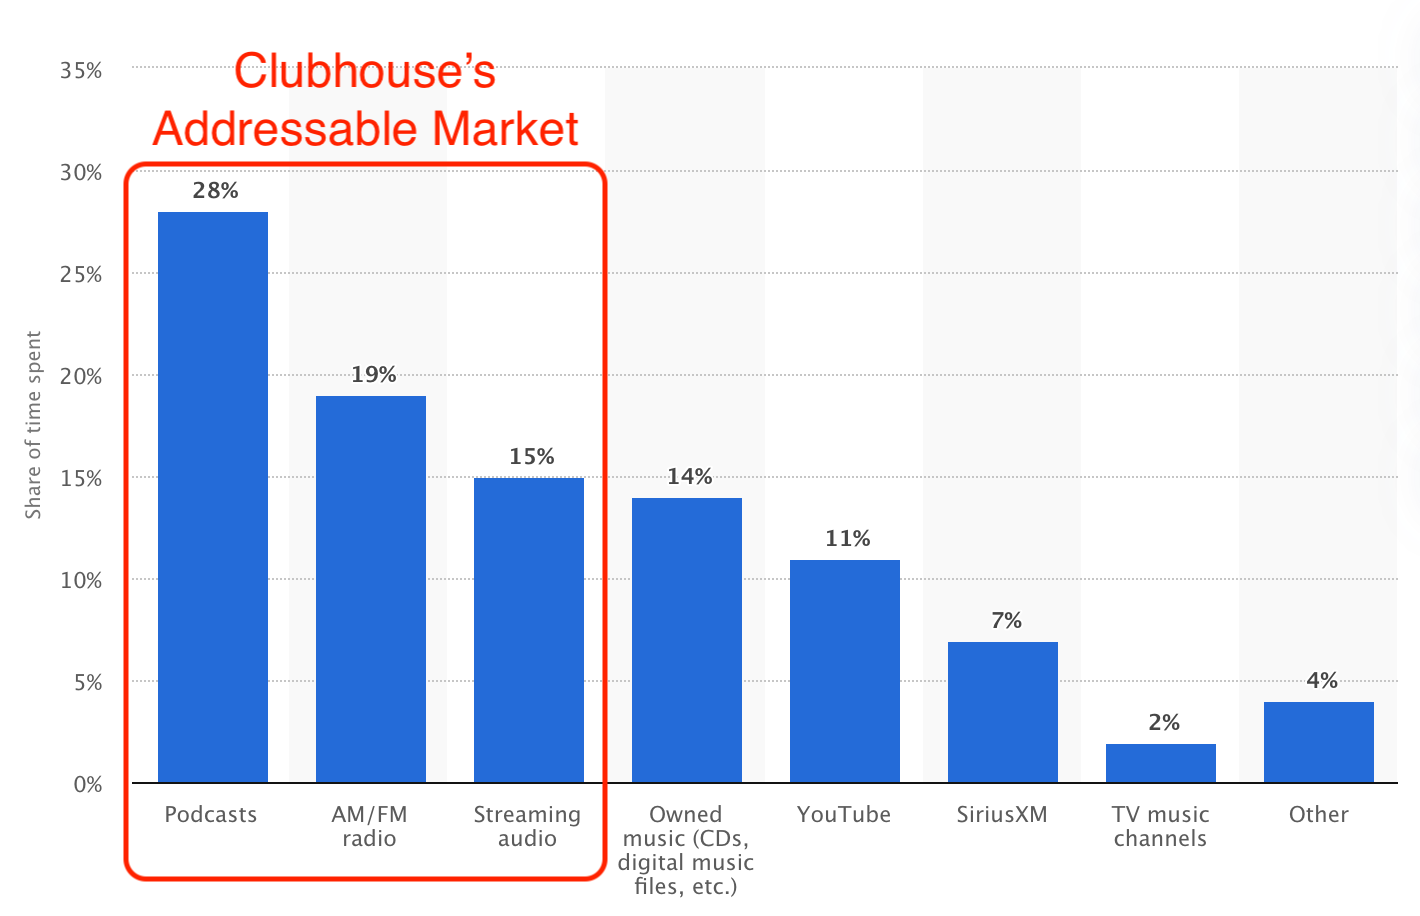 Clubhouse's Total Addressable Market